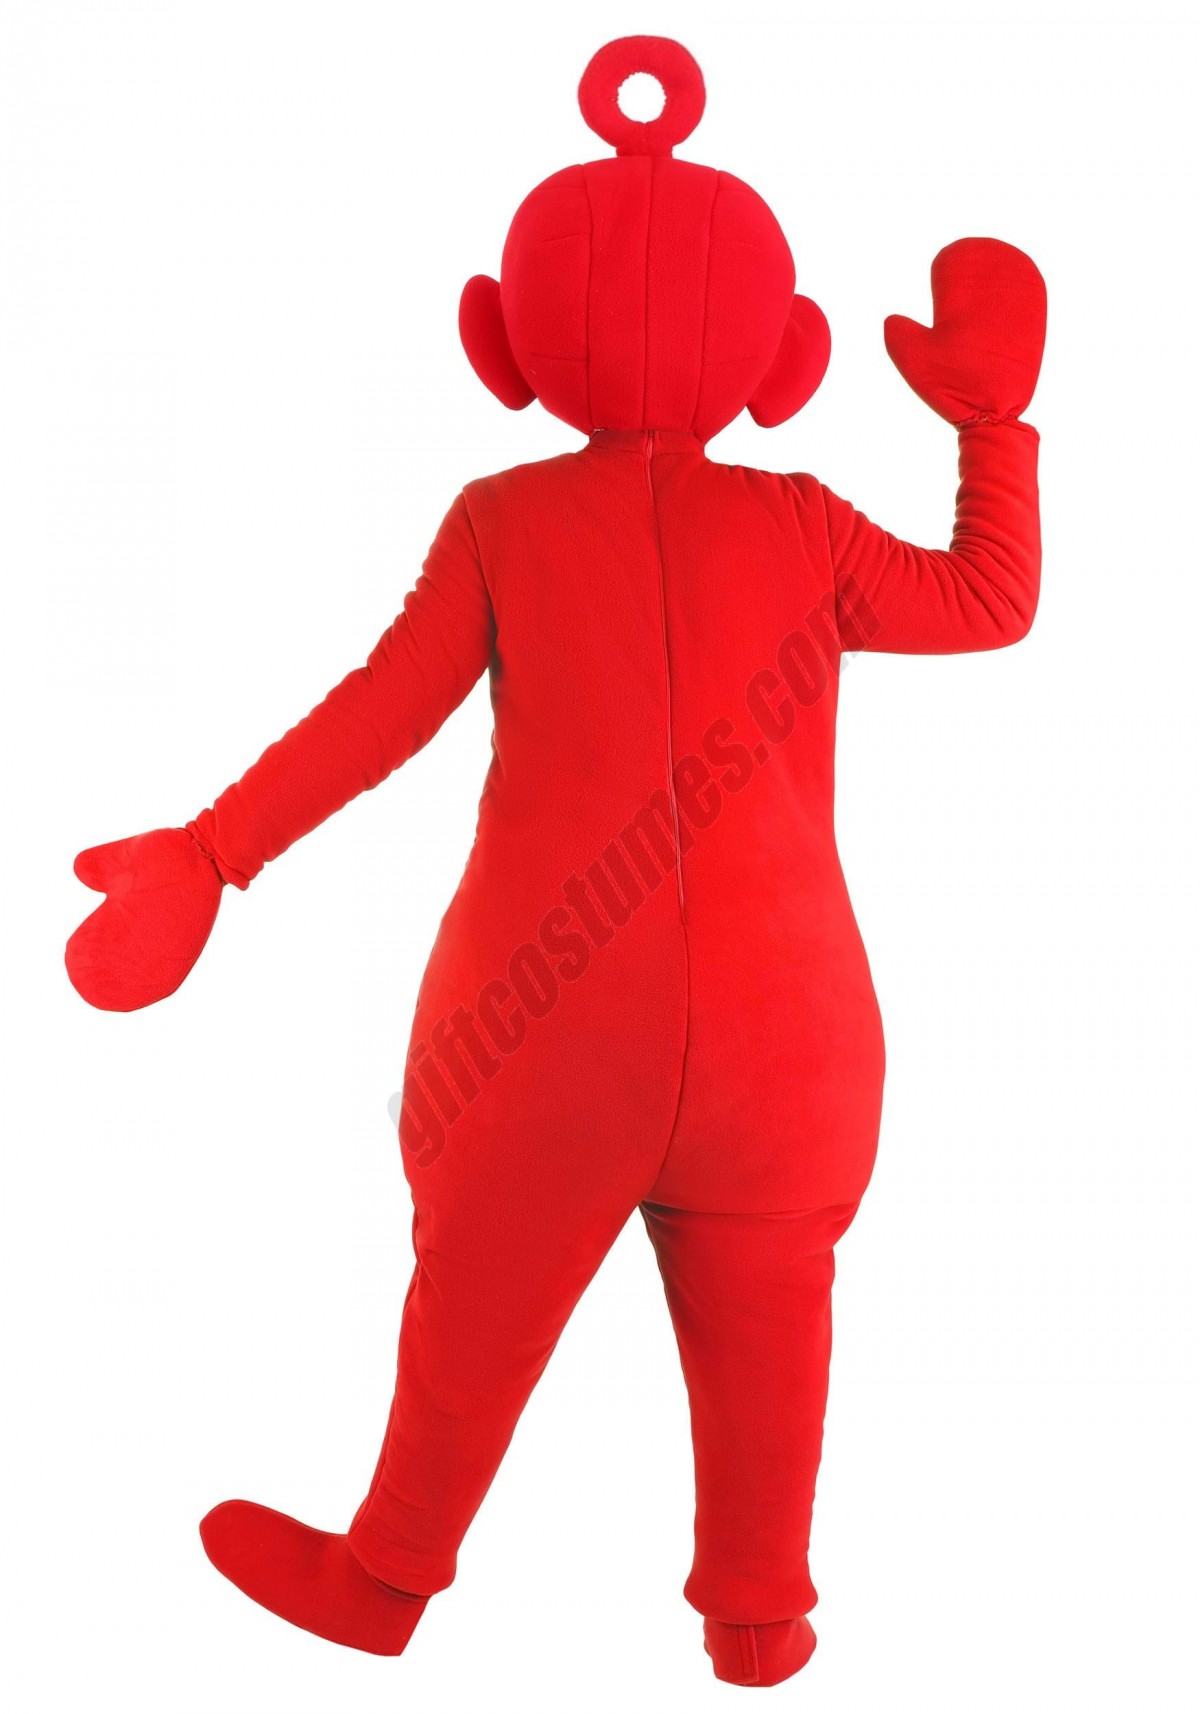 Plus Size Po Teletubbies Costume for Adults Promotions - -1